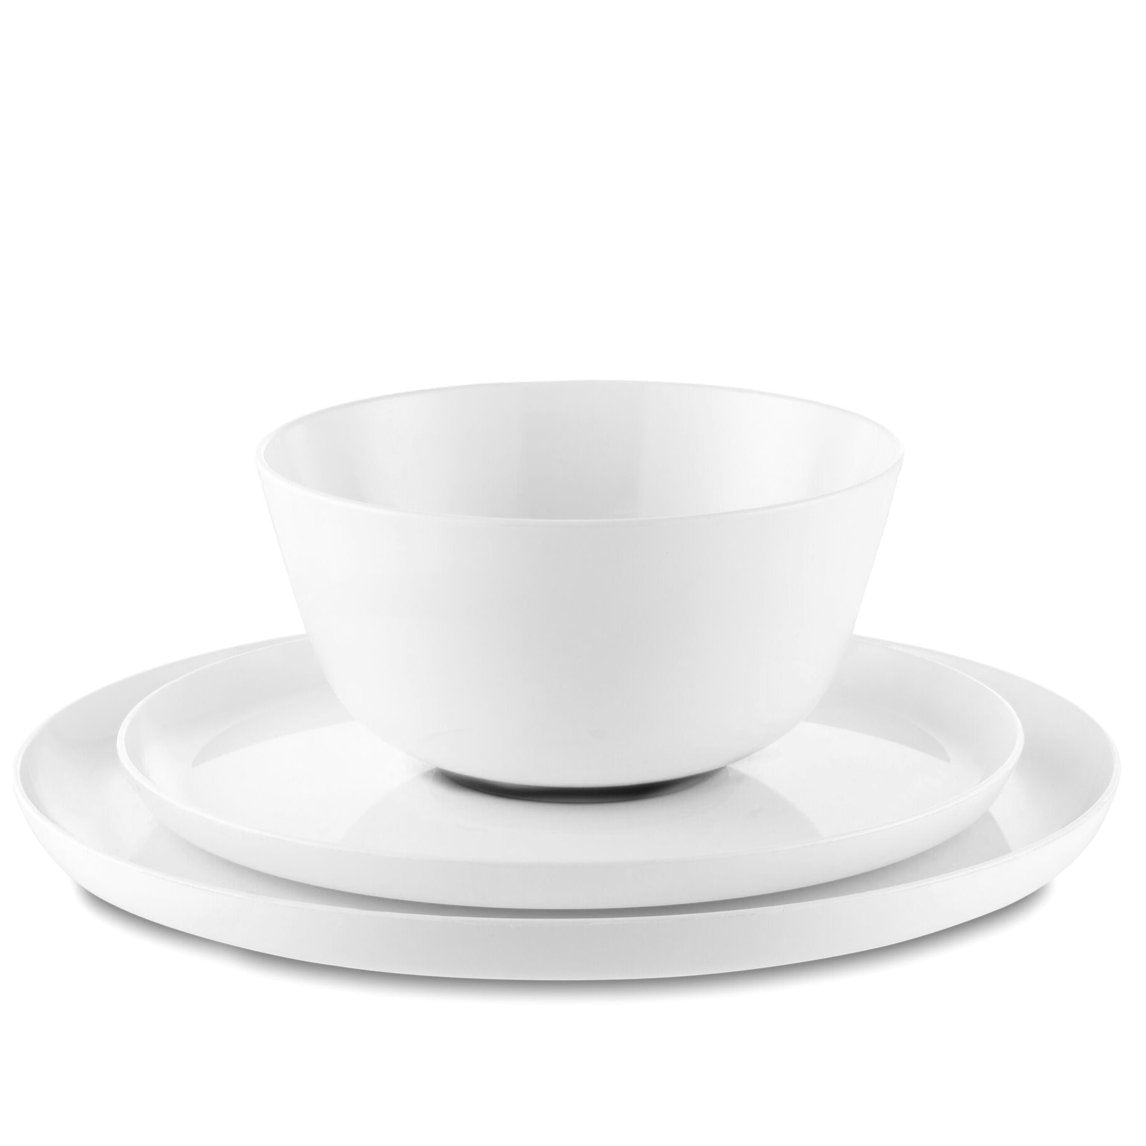 galley ware and dinnerware for boats, yachts and outdoor entertaining